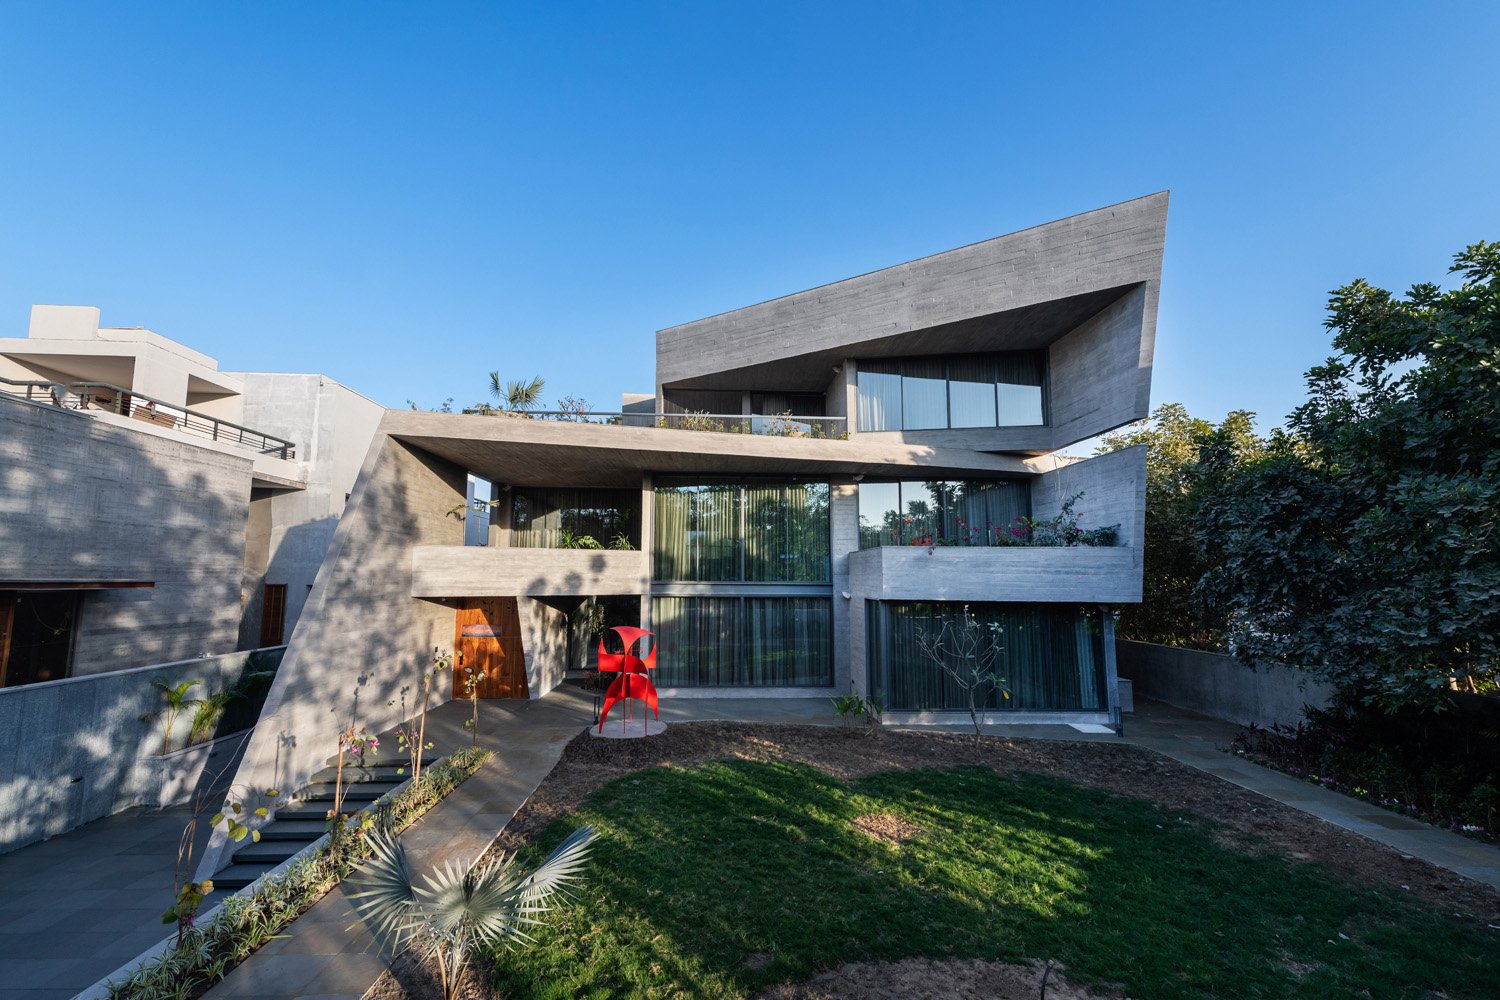 Controlling southwest sunlight was a challenge. Natural light's power to promote positivity and wellness is unmatched. Drought-friendly trees were strategically placed to shield the house from southwesterly heat as they grow. | PHX India